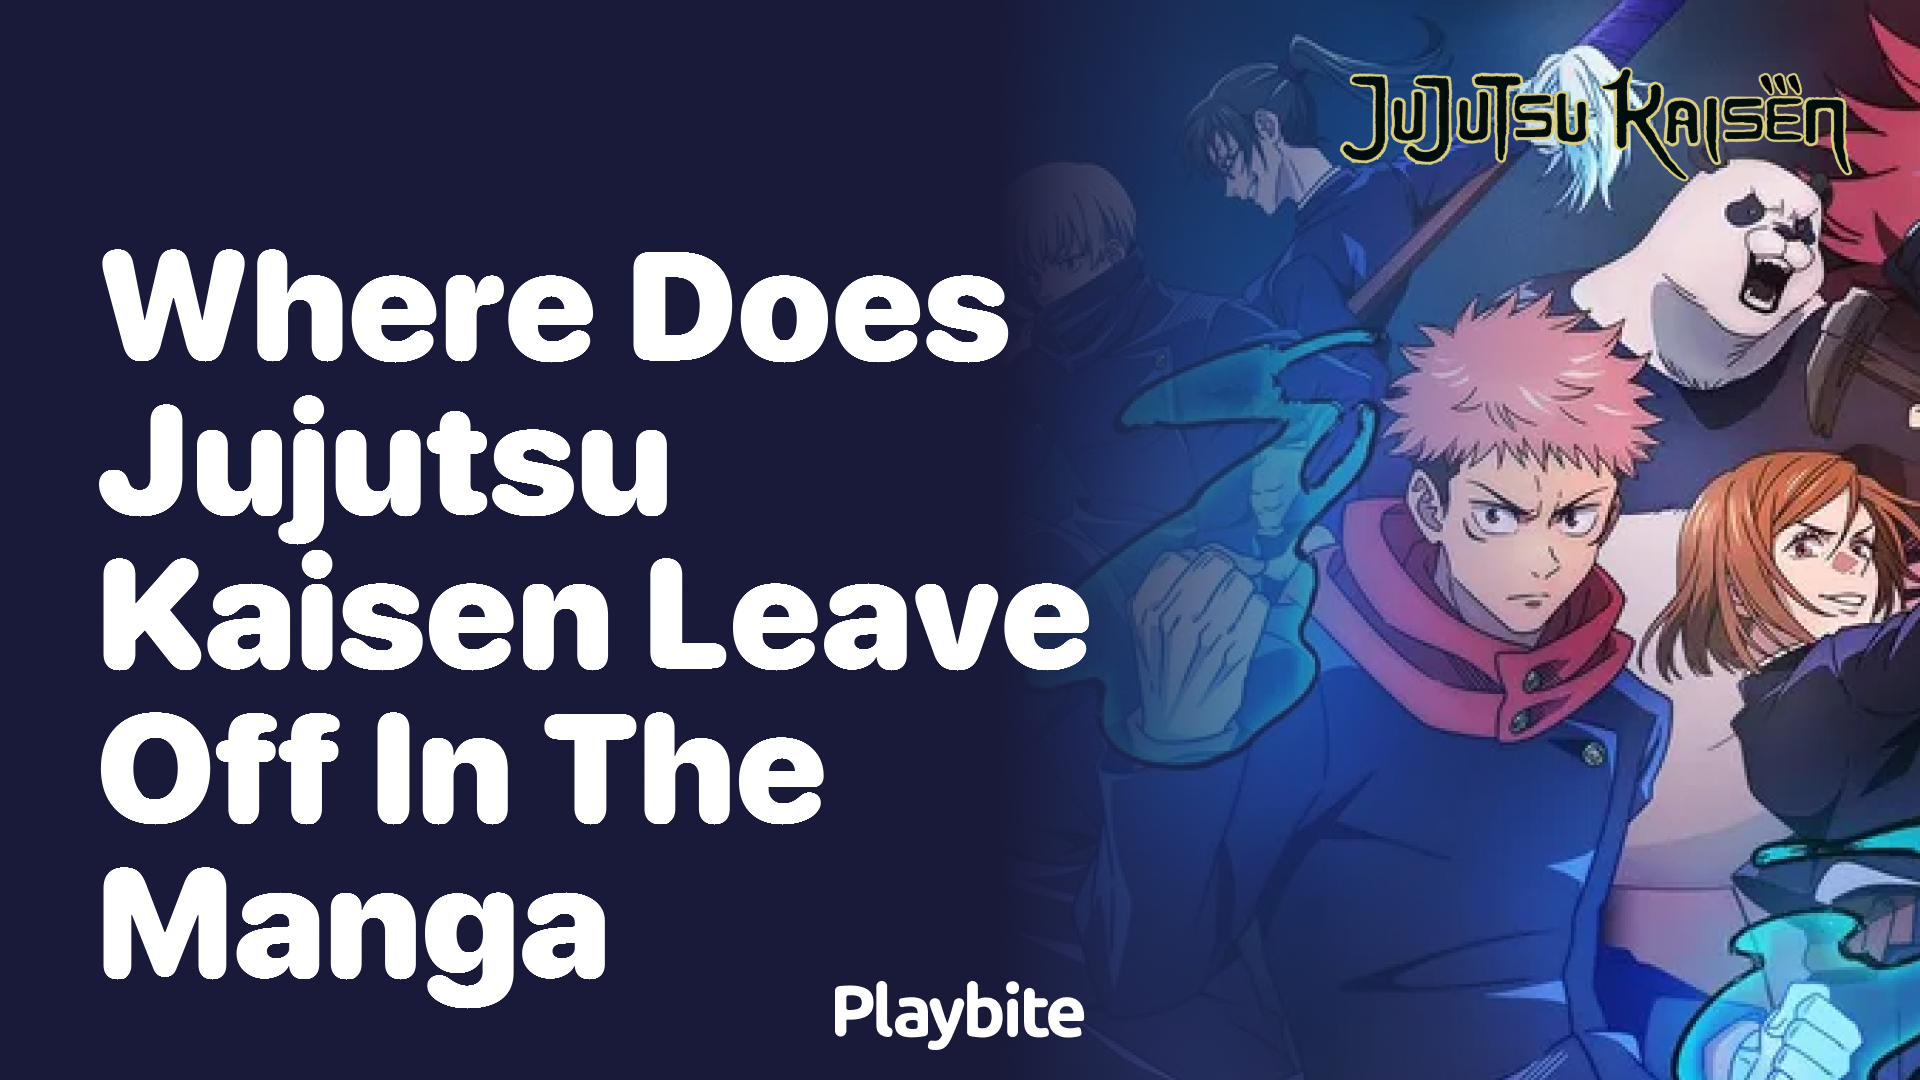 Where does Jujutsu Kaisen leave off in the manga?